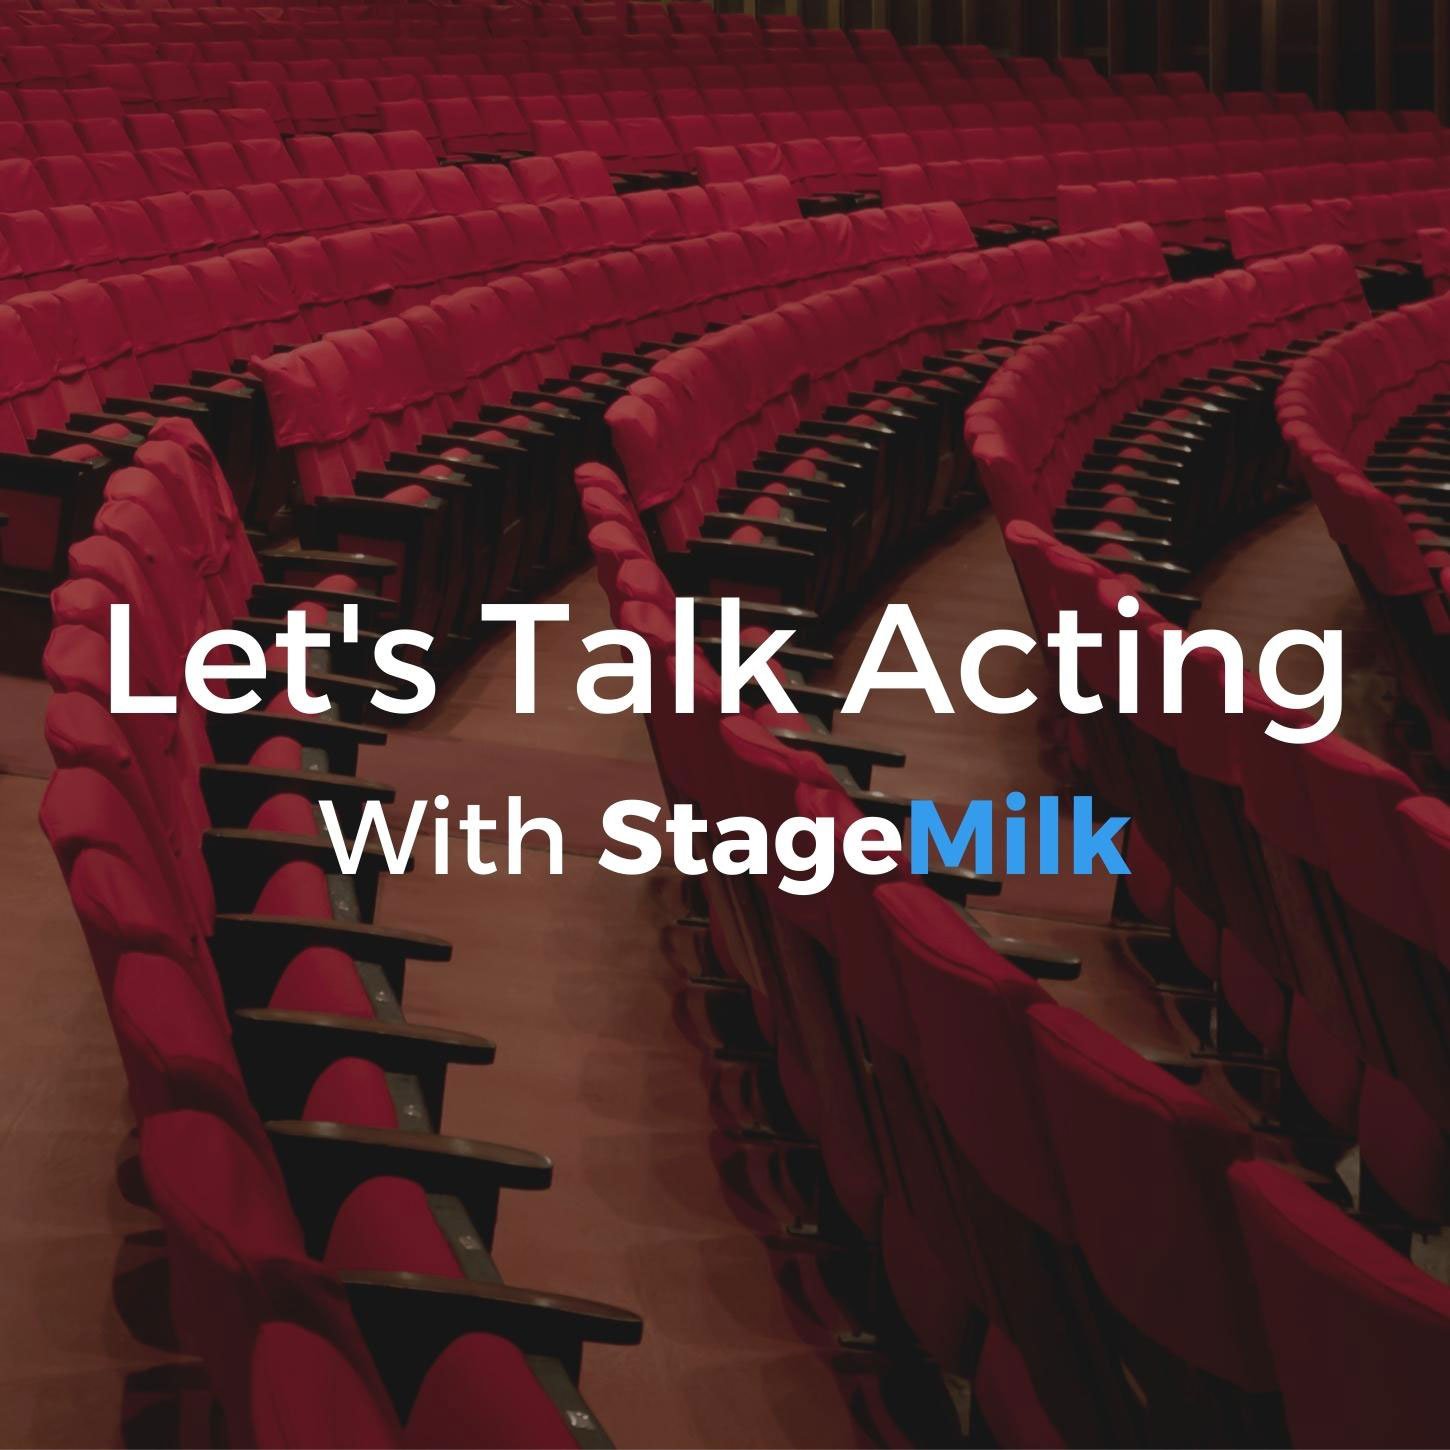 Let's Talk Acting